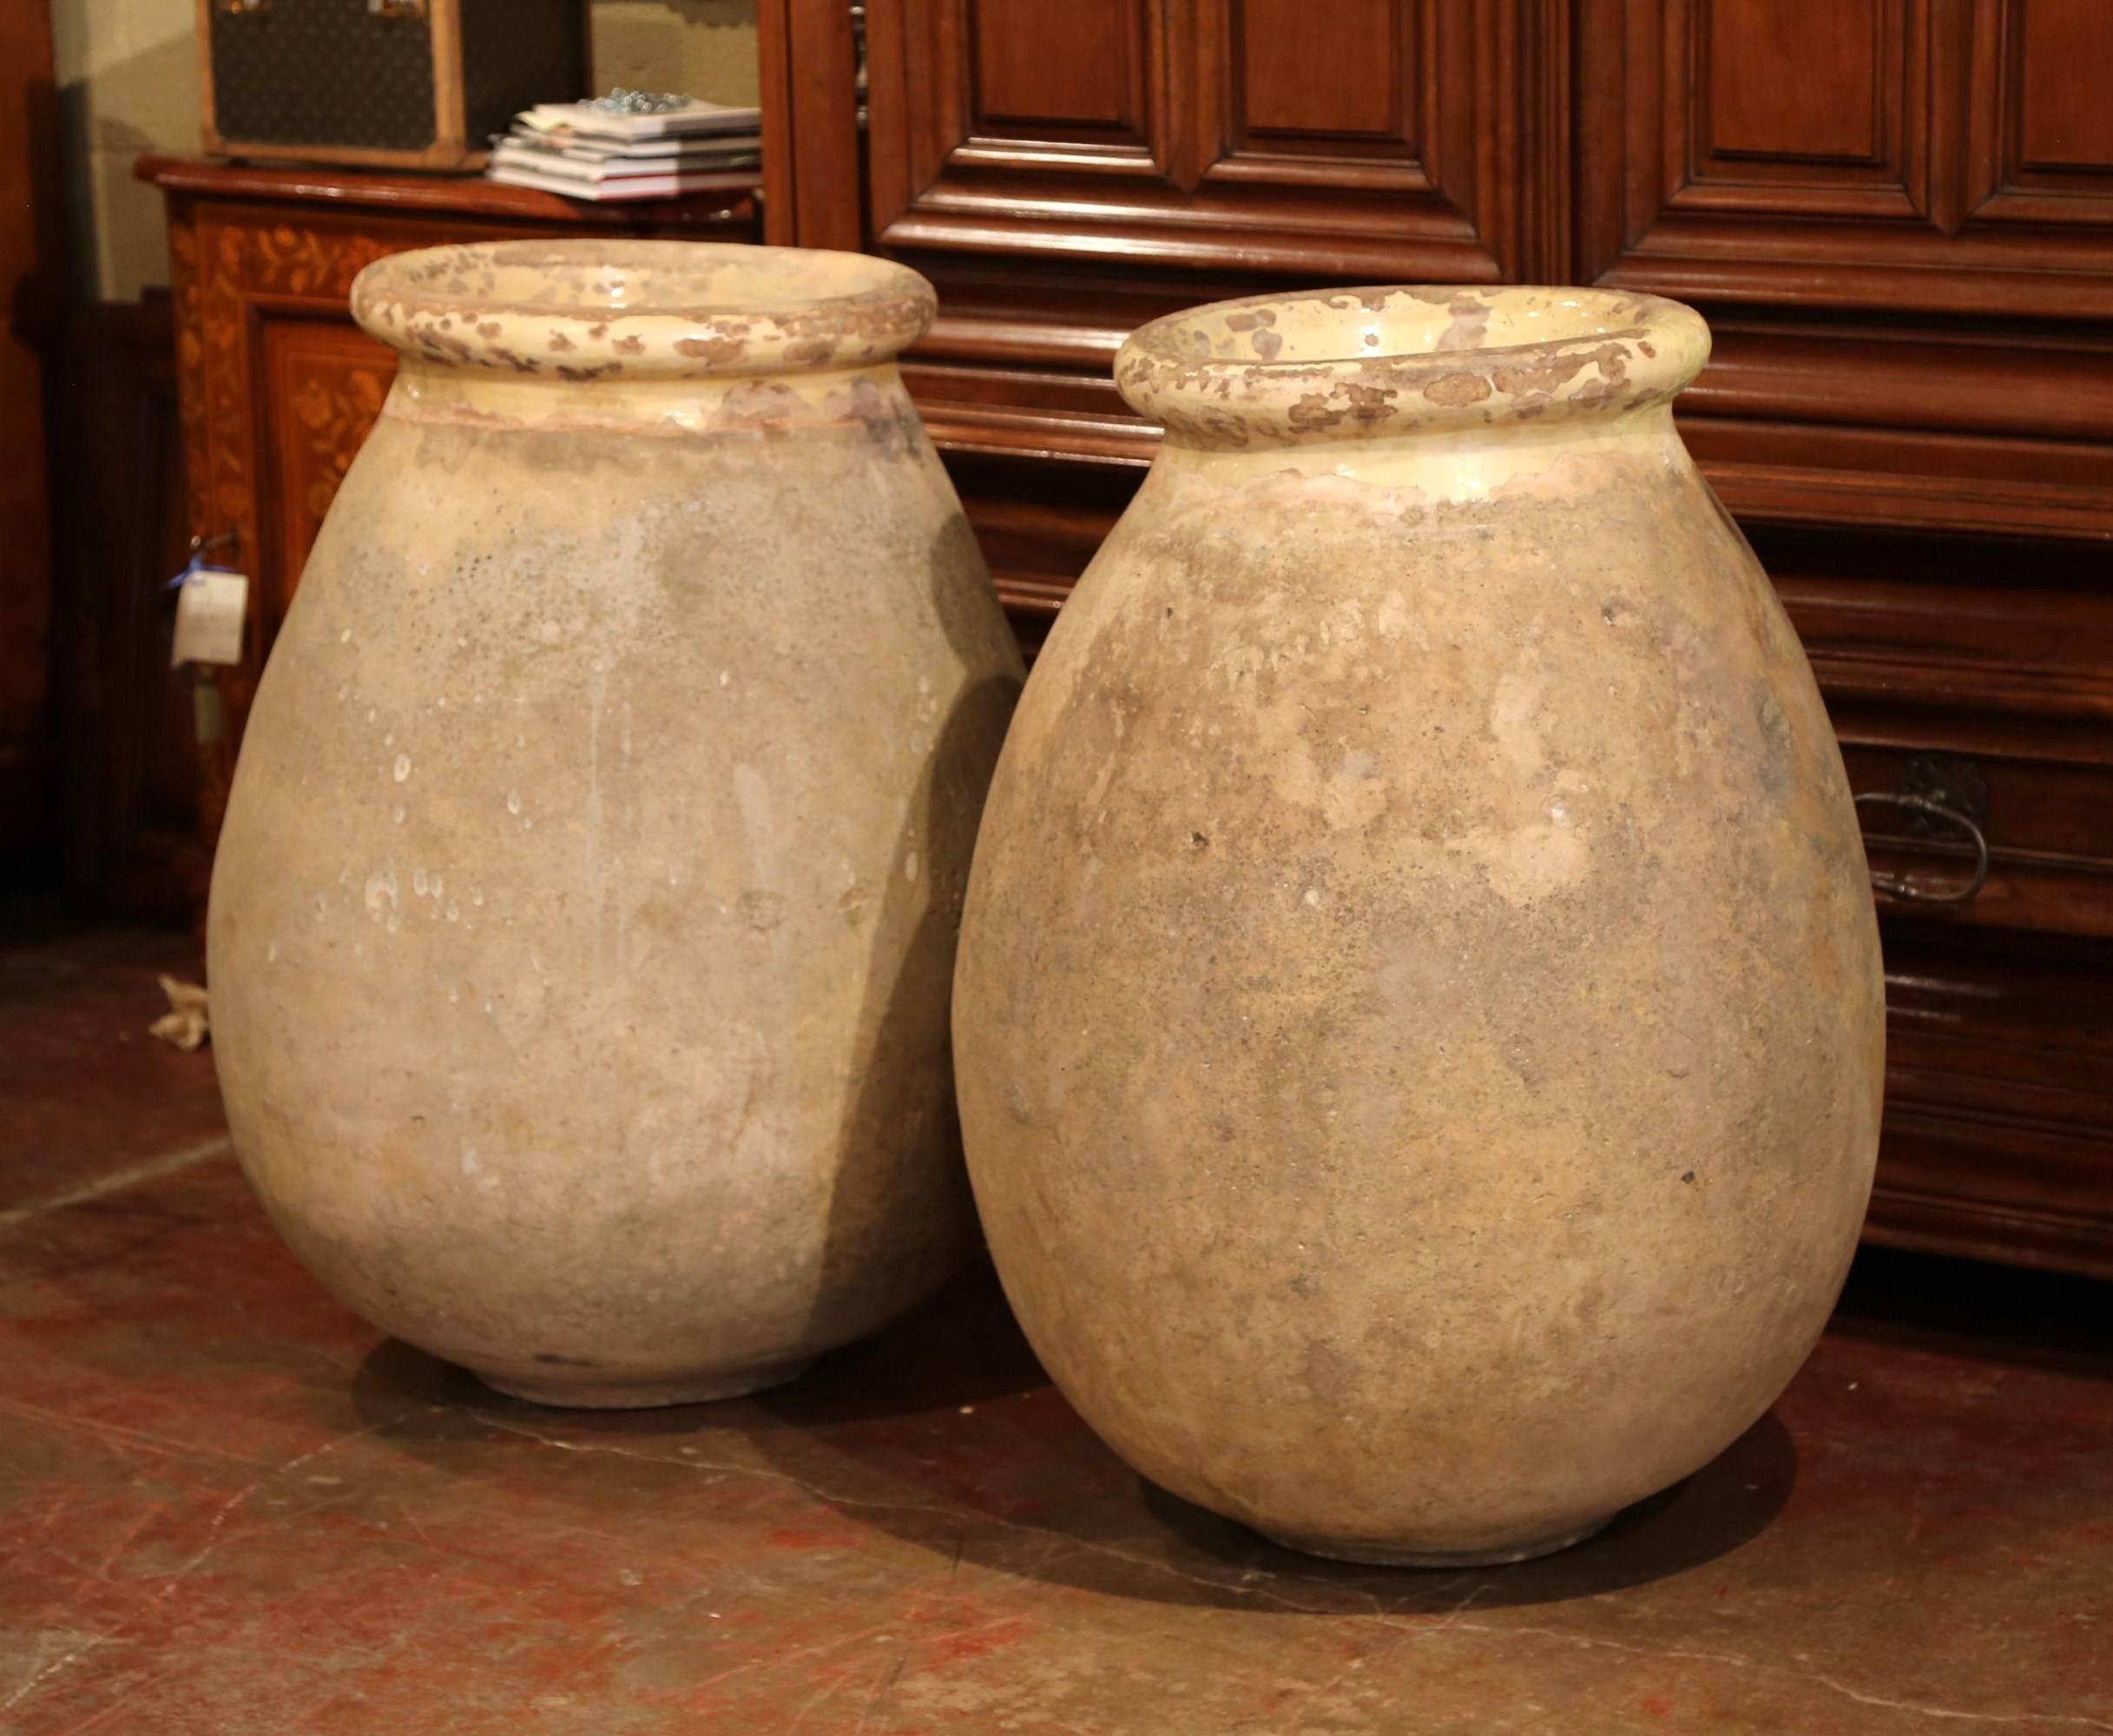 This large pair of earthenware olive jar was created in Southern France, circa 1870. Round in shape, both antique vases have a neutral beige color finish embellished by a yellow glaze around the neck and trim. Overall, these traditional jars are in